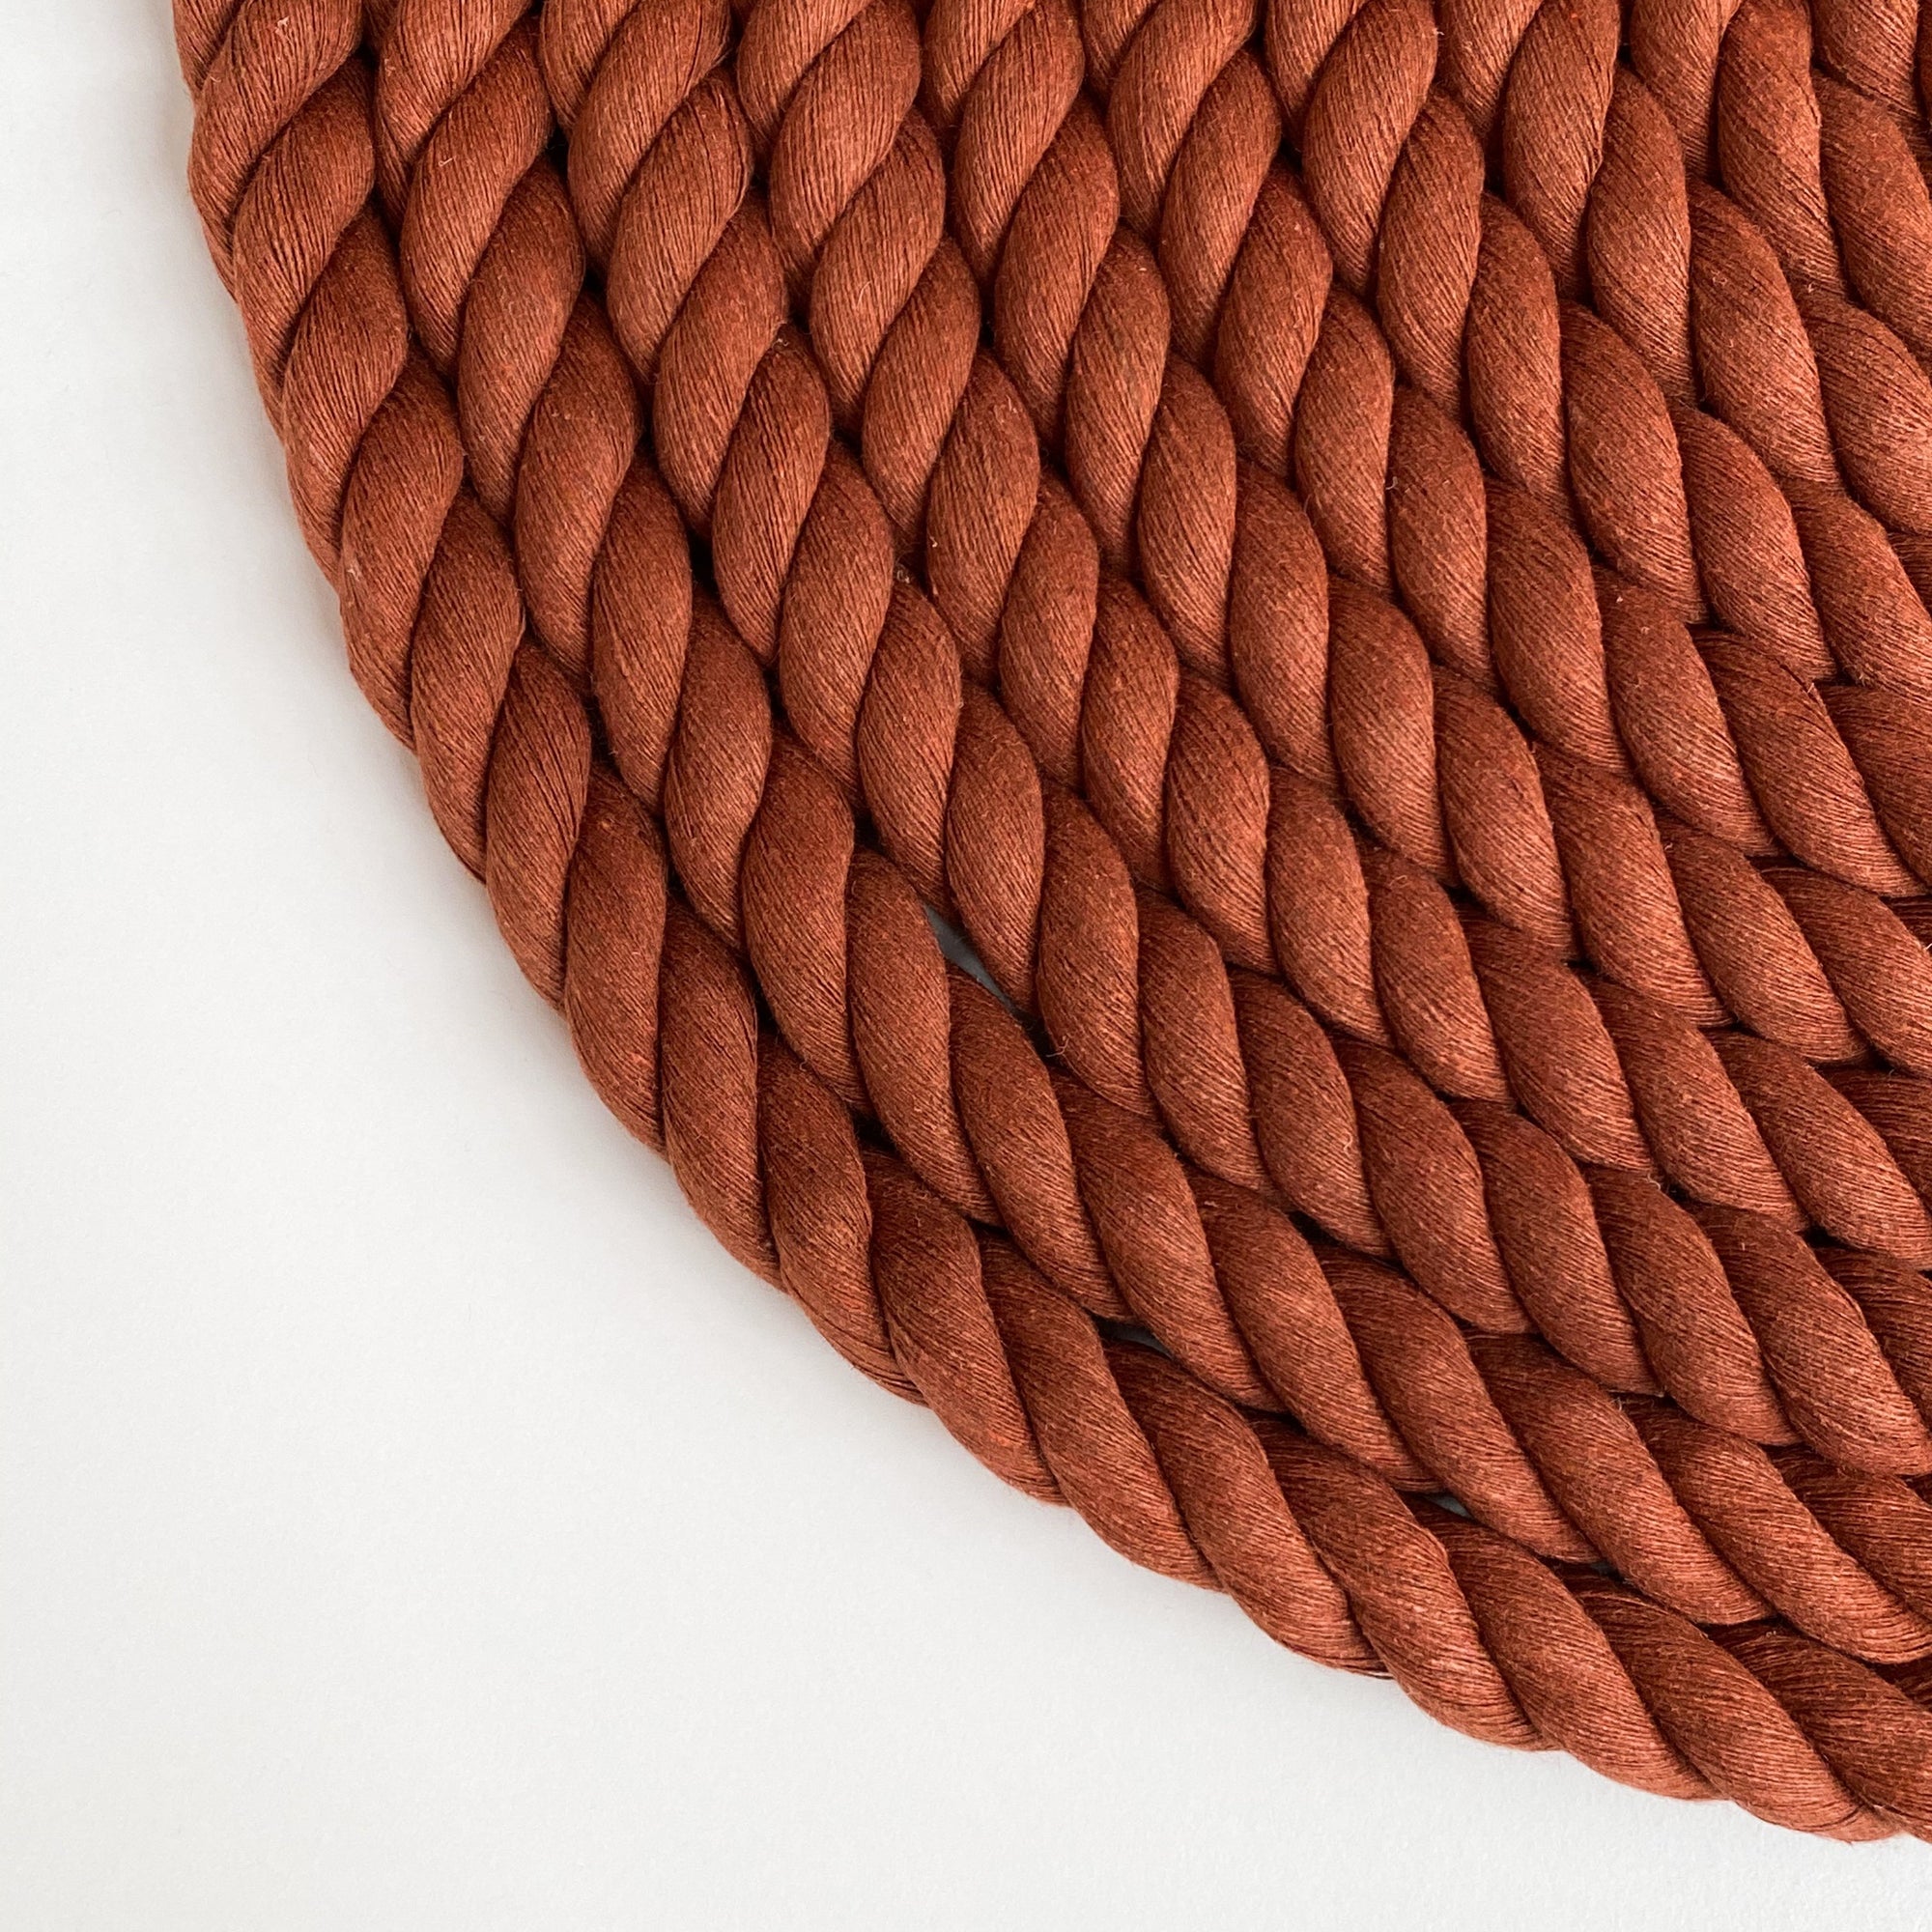 Mary Maker Studio 3Ply Twisted Rope Rust 1m 15mm Coloured Macrame Rope macrame cotton macrame rope macrame workshop macrame patterns macrame